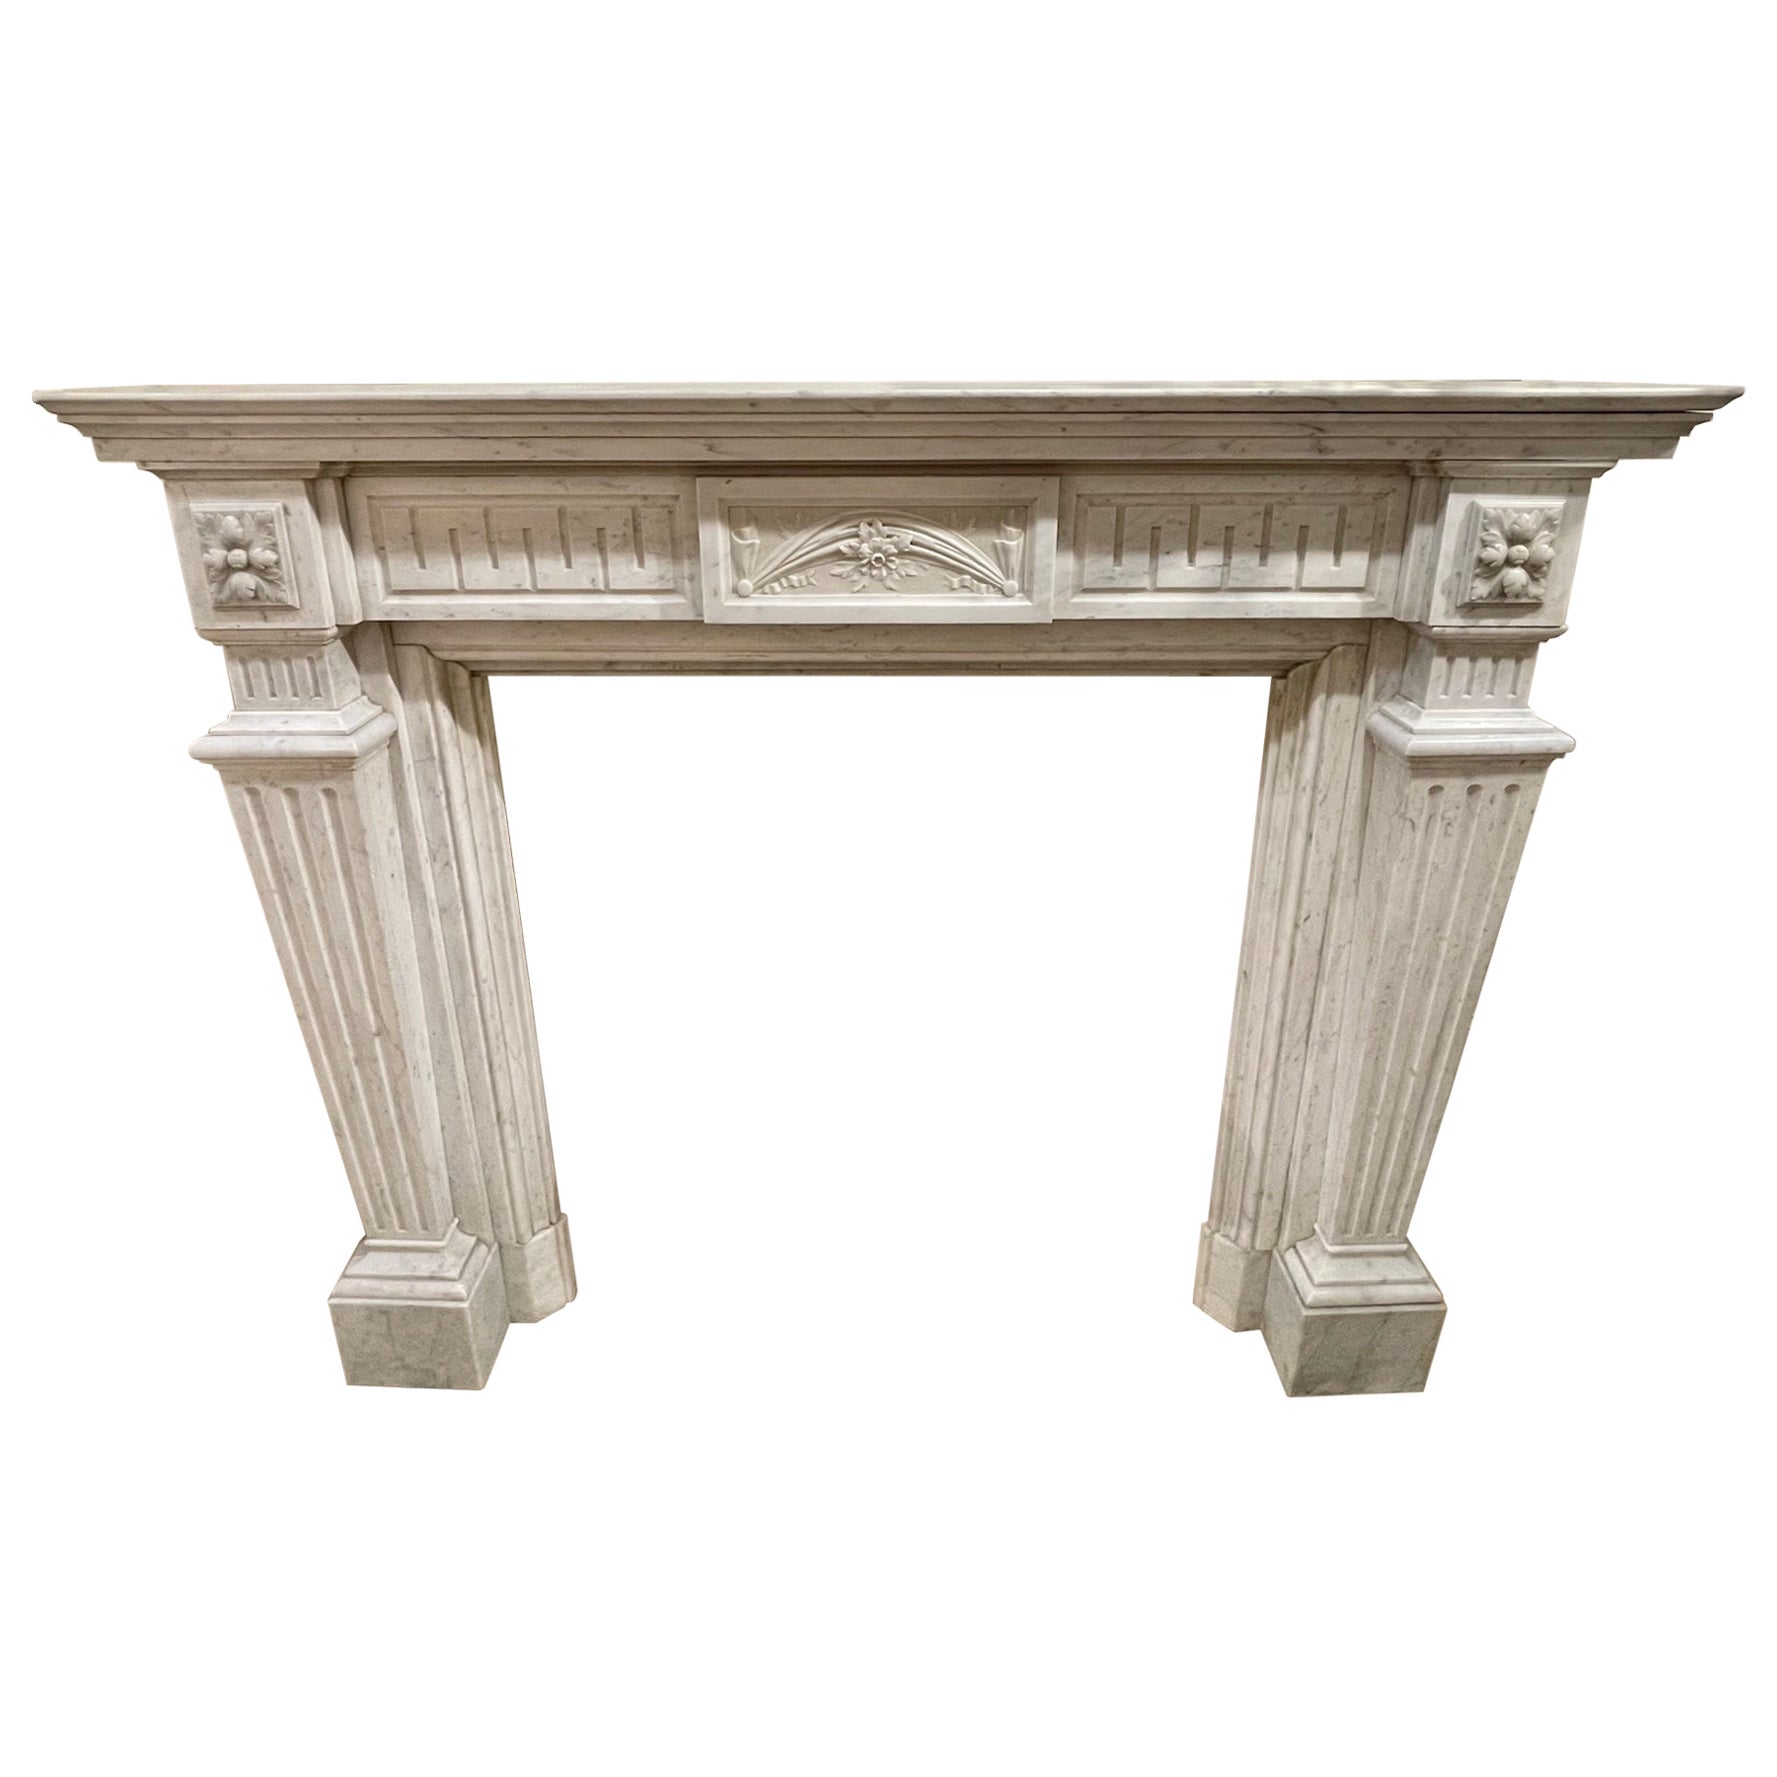 Large Scale 19th Century French Louis XVI Style Marble Mantel